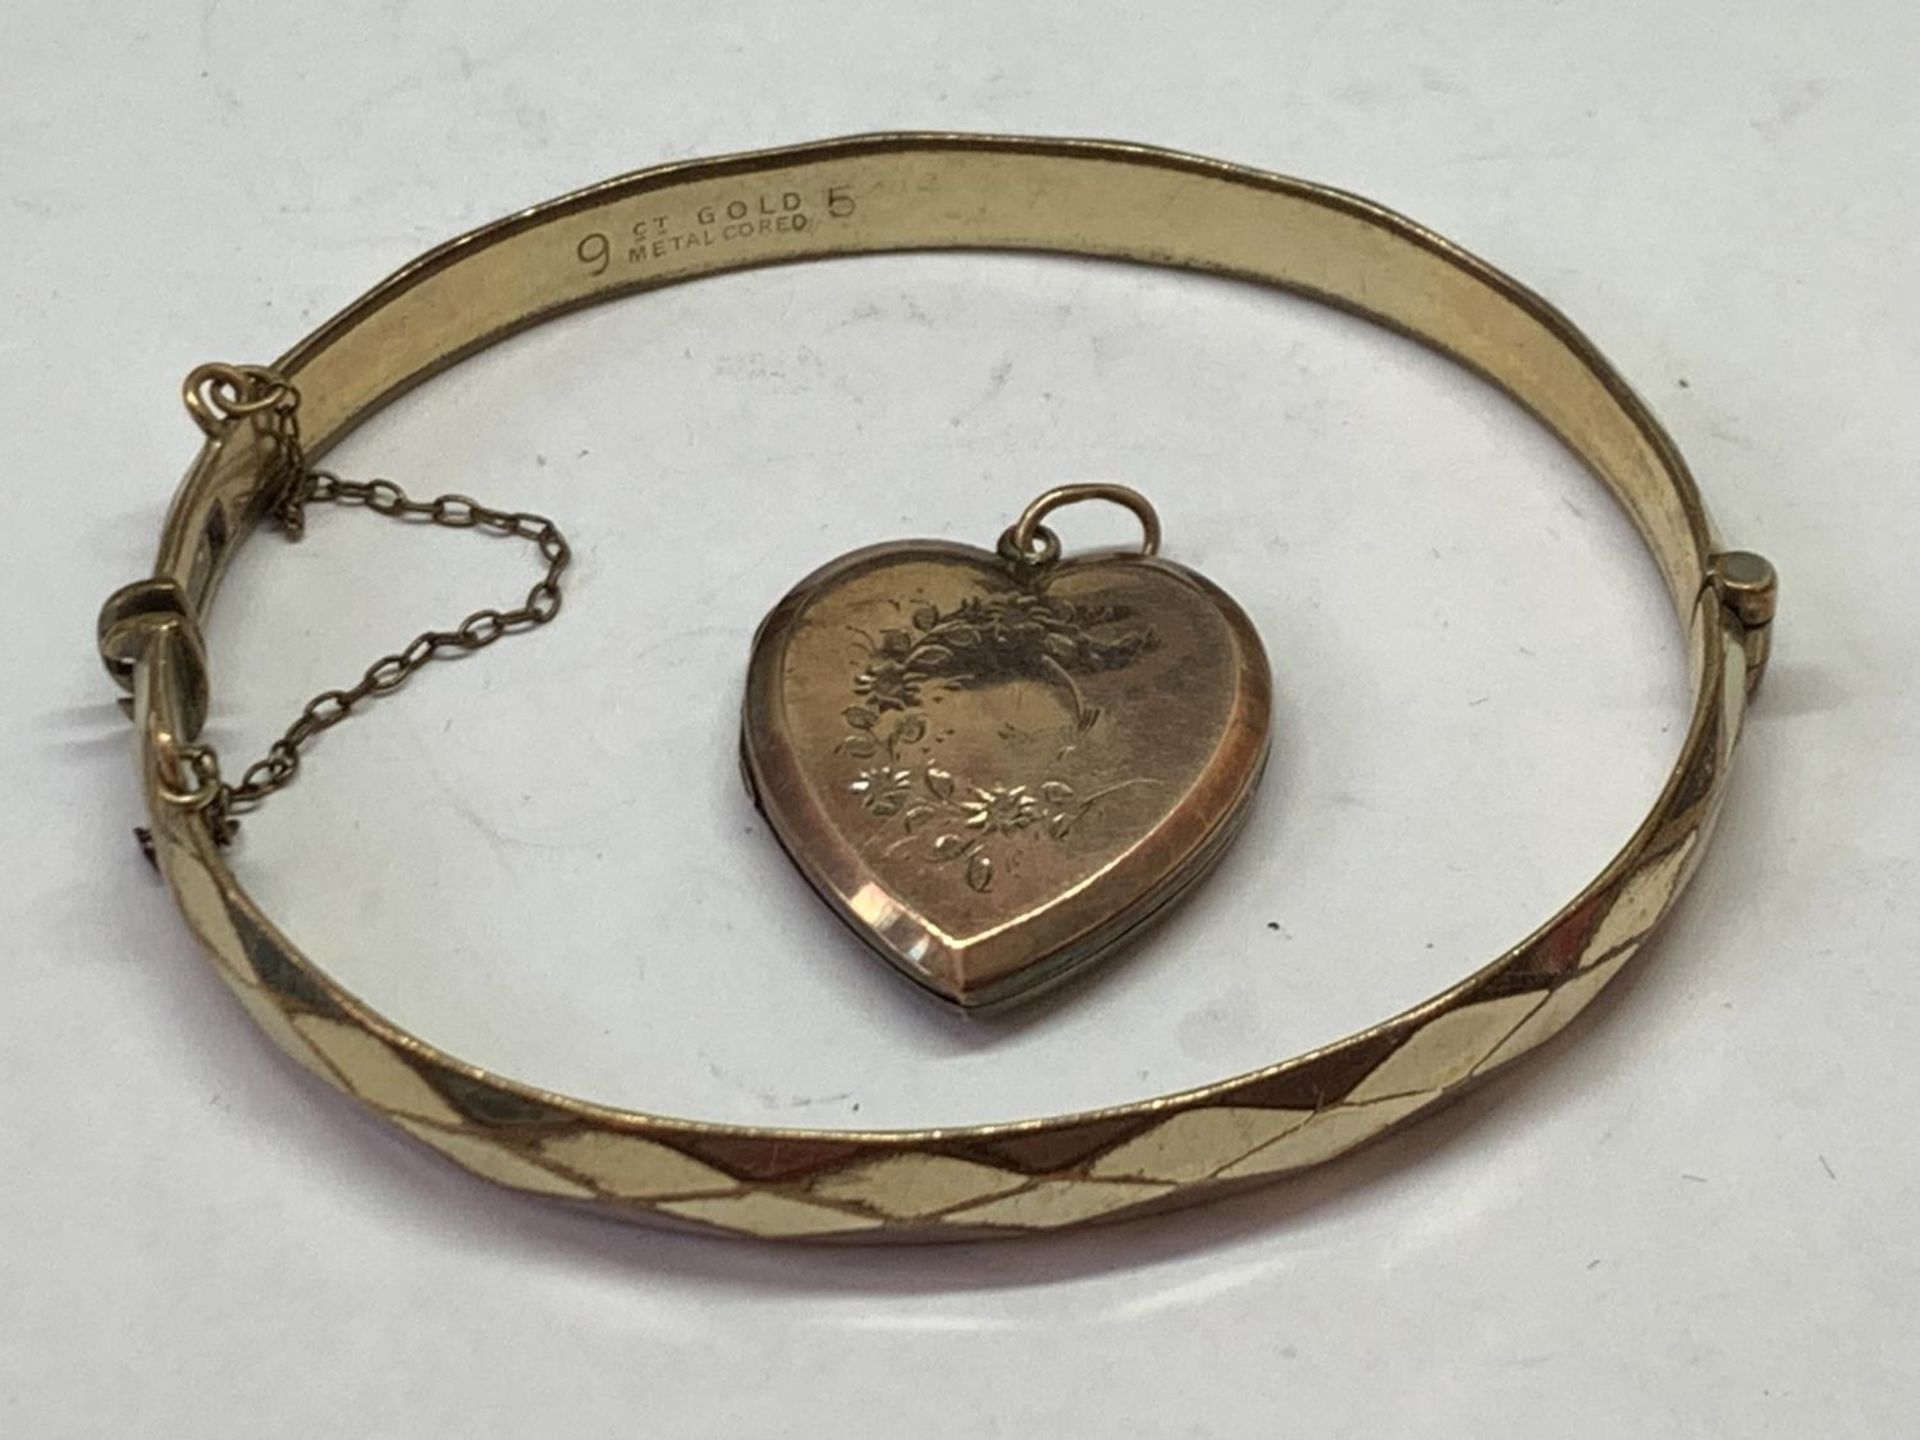 TWO 9 CARAT GOLD PLATED ITEMS - A BANGLE AND A HEART SHAPED LOCKET - Image 2 of 3